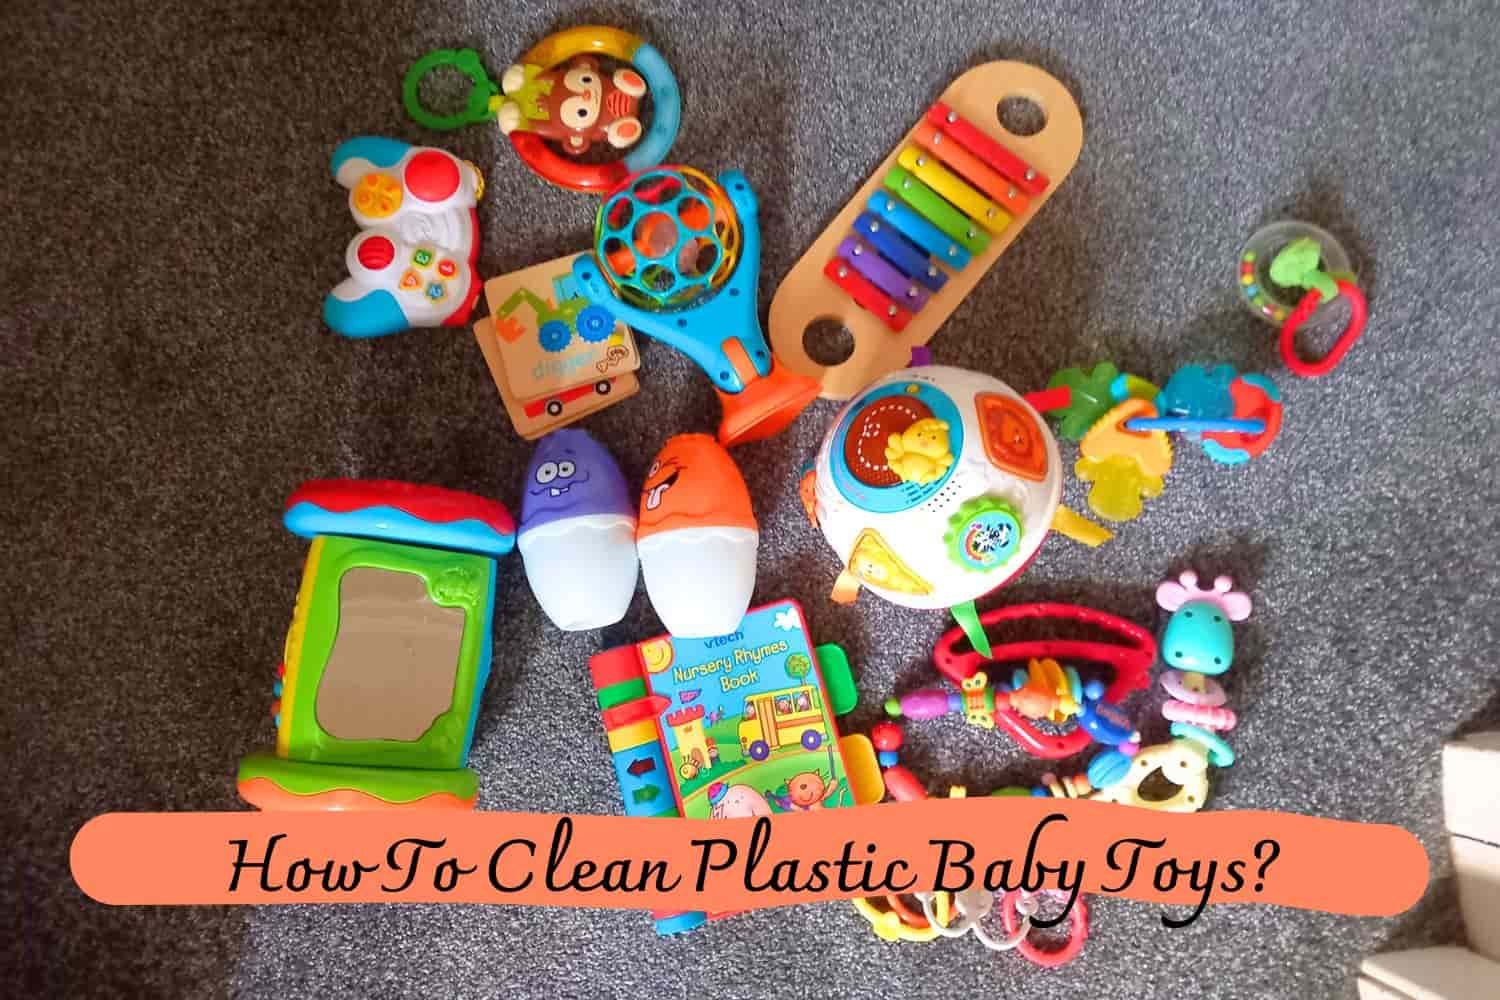 How To Clean Plastic Baby Toys